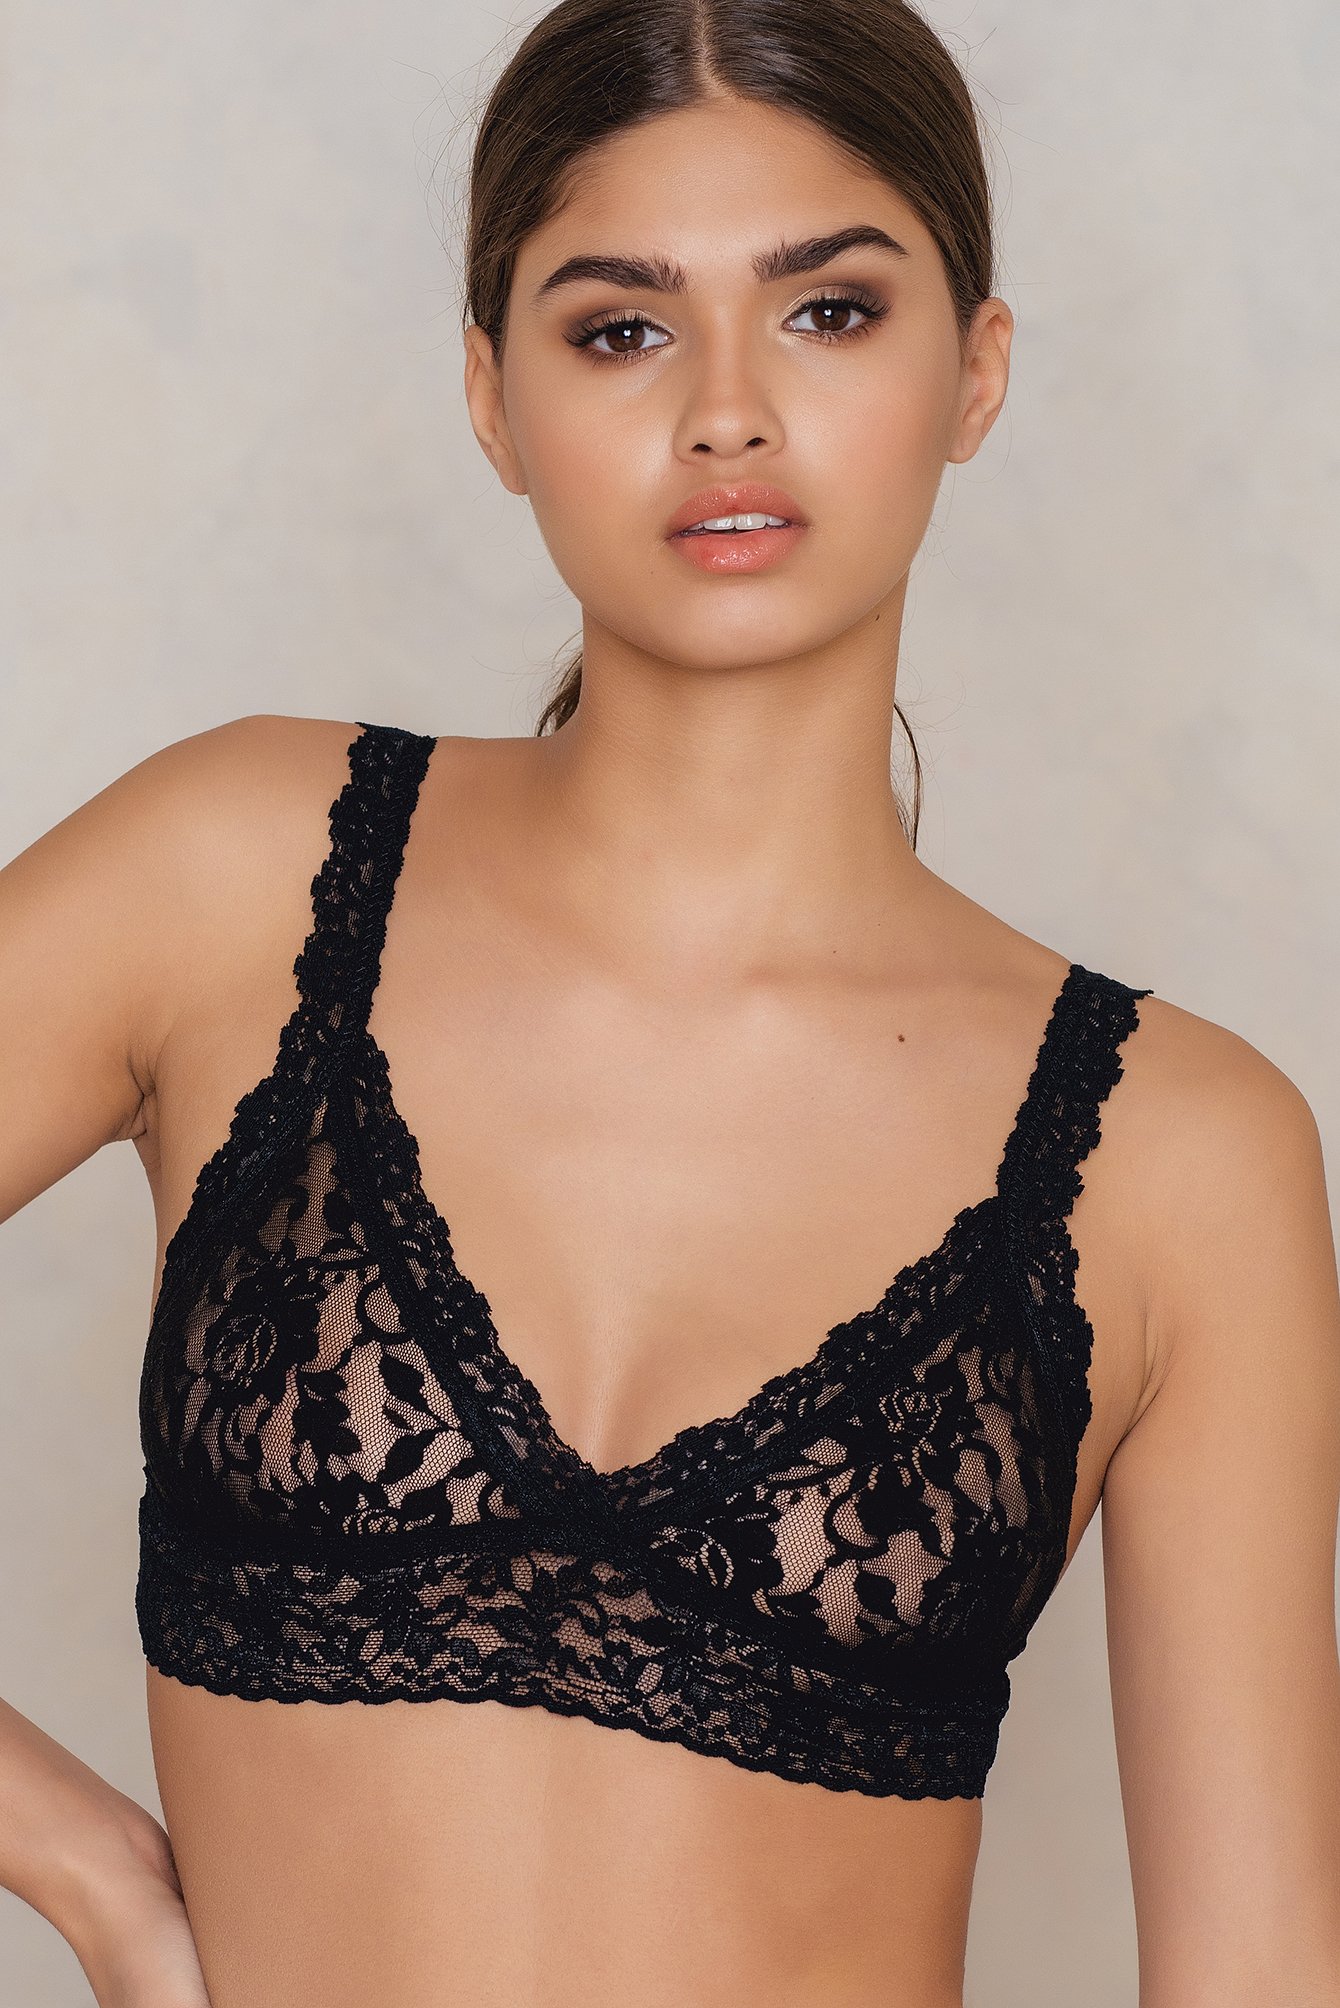 Hanky Panky Signature Crossover Lace Bralette